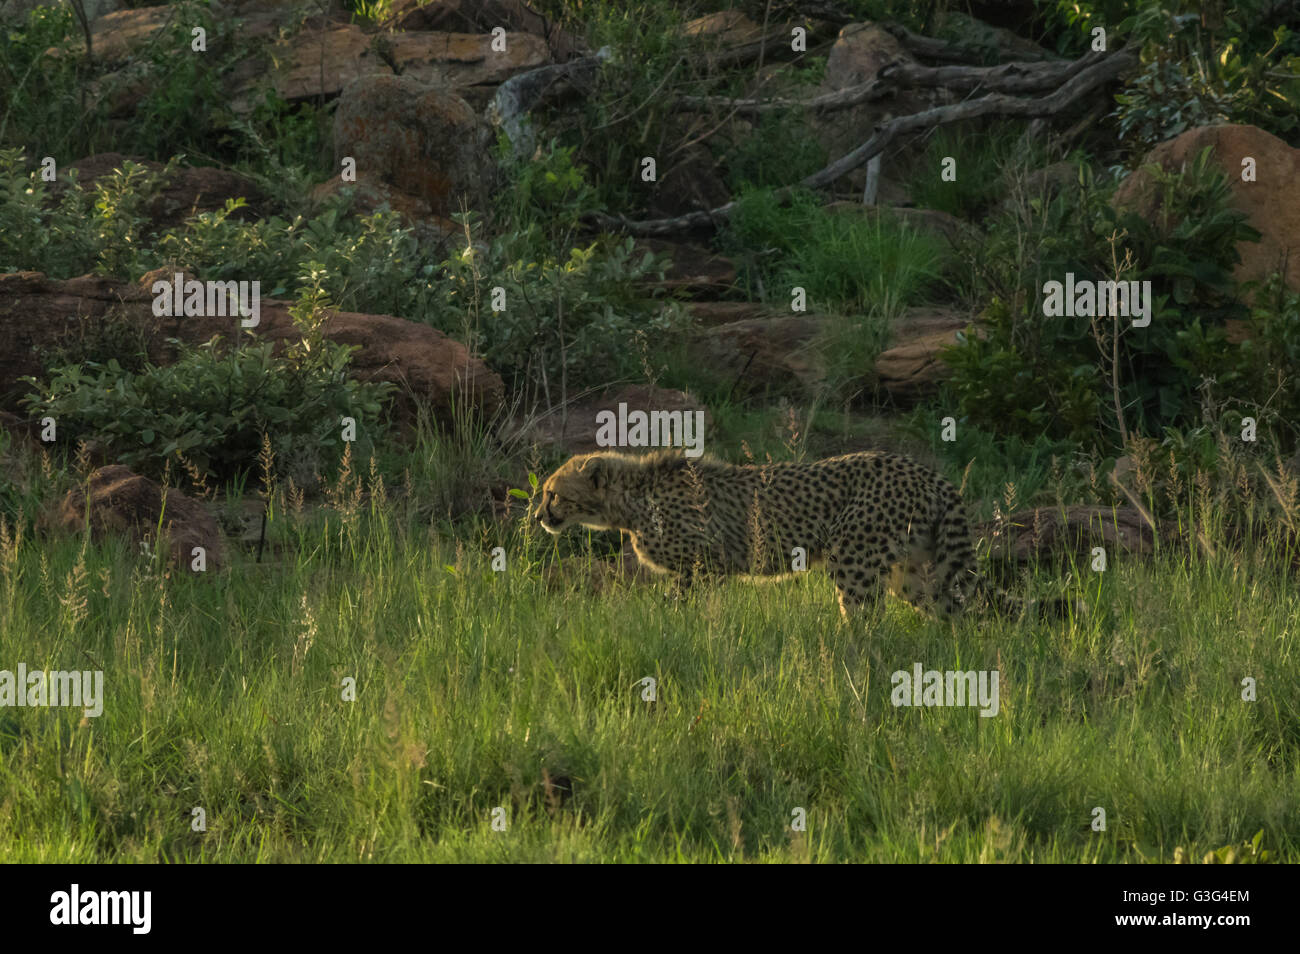 South African Cheetah varia in tutto il Welgevonden Game Reserve in Sud Africa Foto Stock